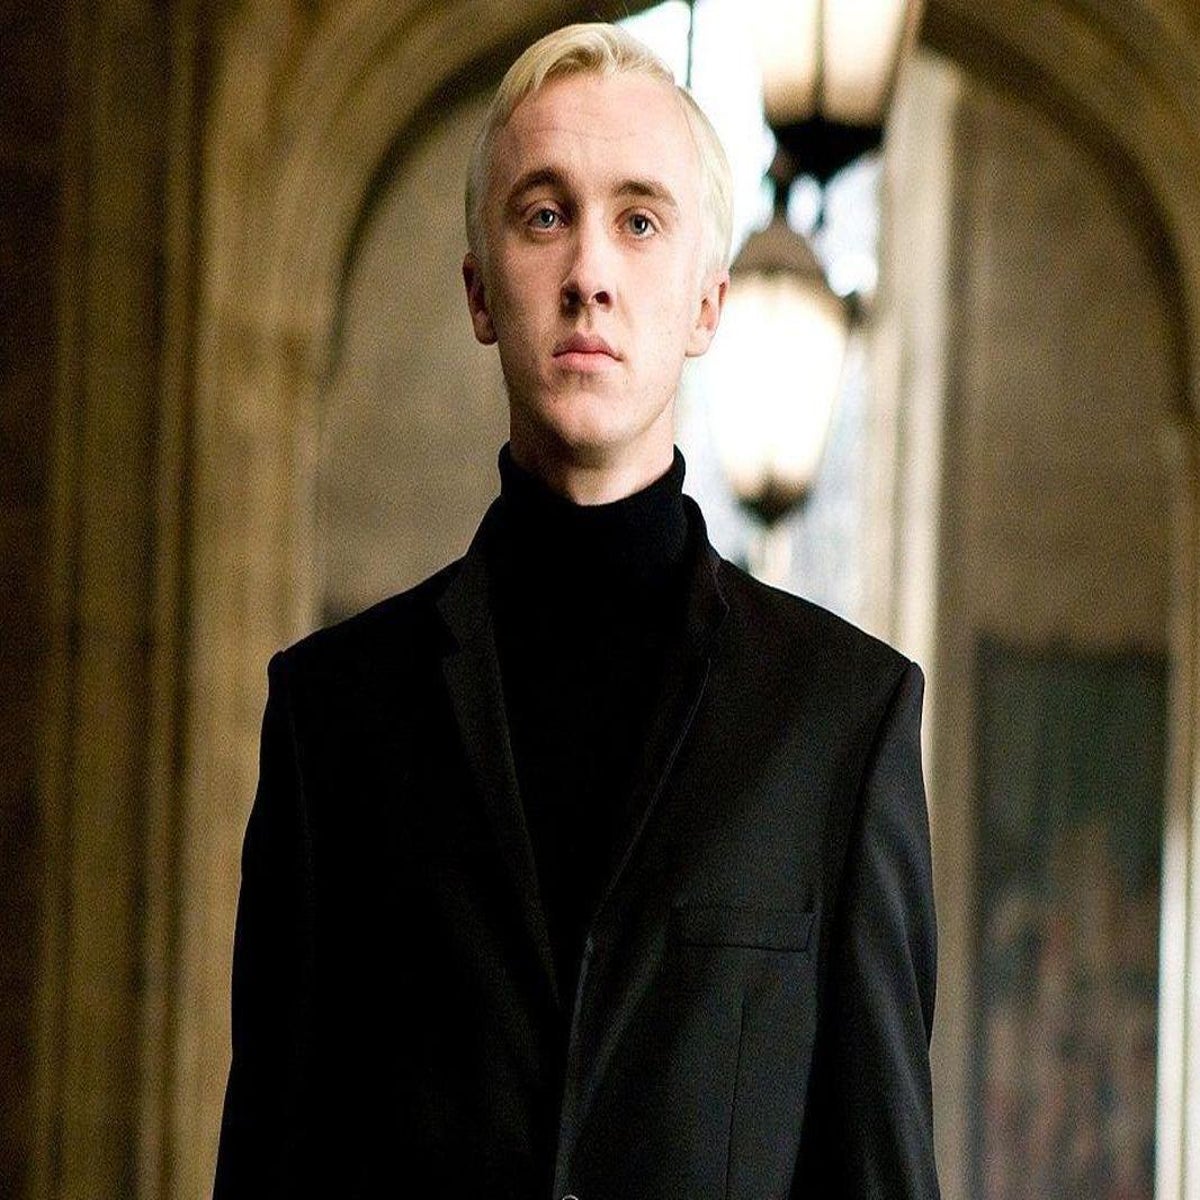 https://static.independent.co.uk/s3fs-public/thumbnails/image/2018/11/23/09/malfoy.0.0.jpg?width=1200&height=1200&fit=crop